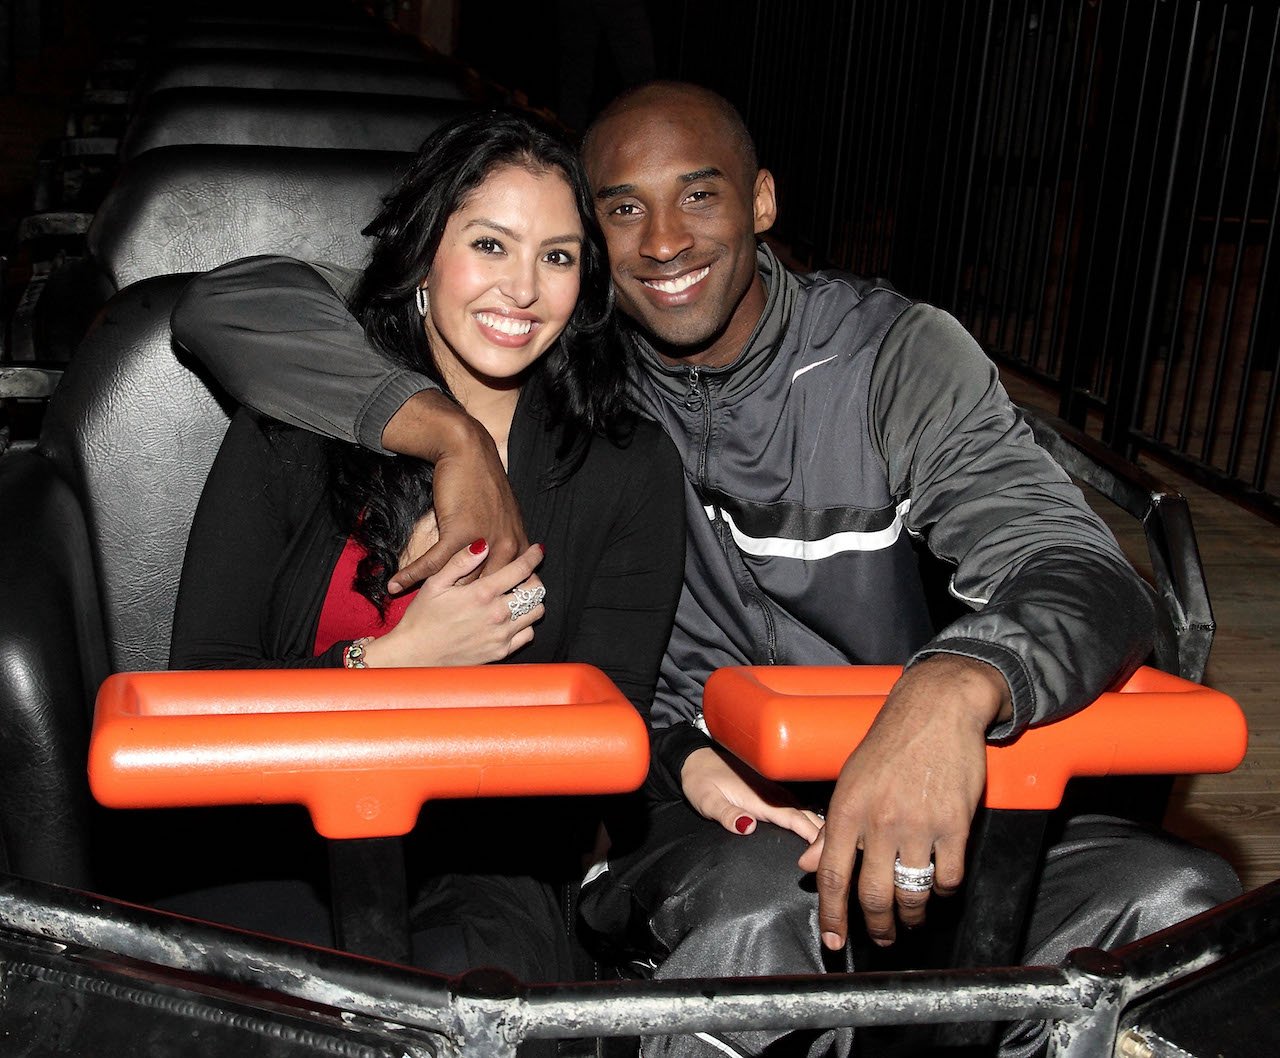 Vanessa and Kobe Bryant at Six Flags; Vanessa turned down reality television shows, including 'Basketball Wives'